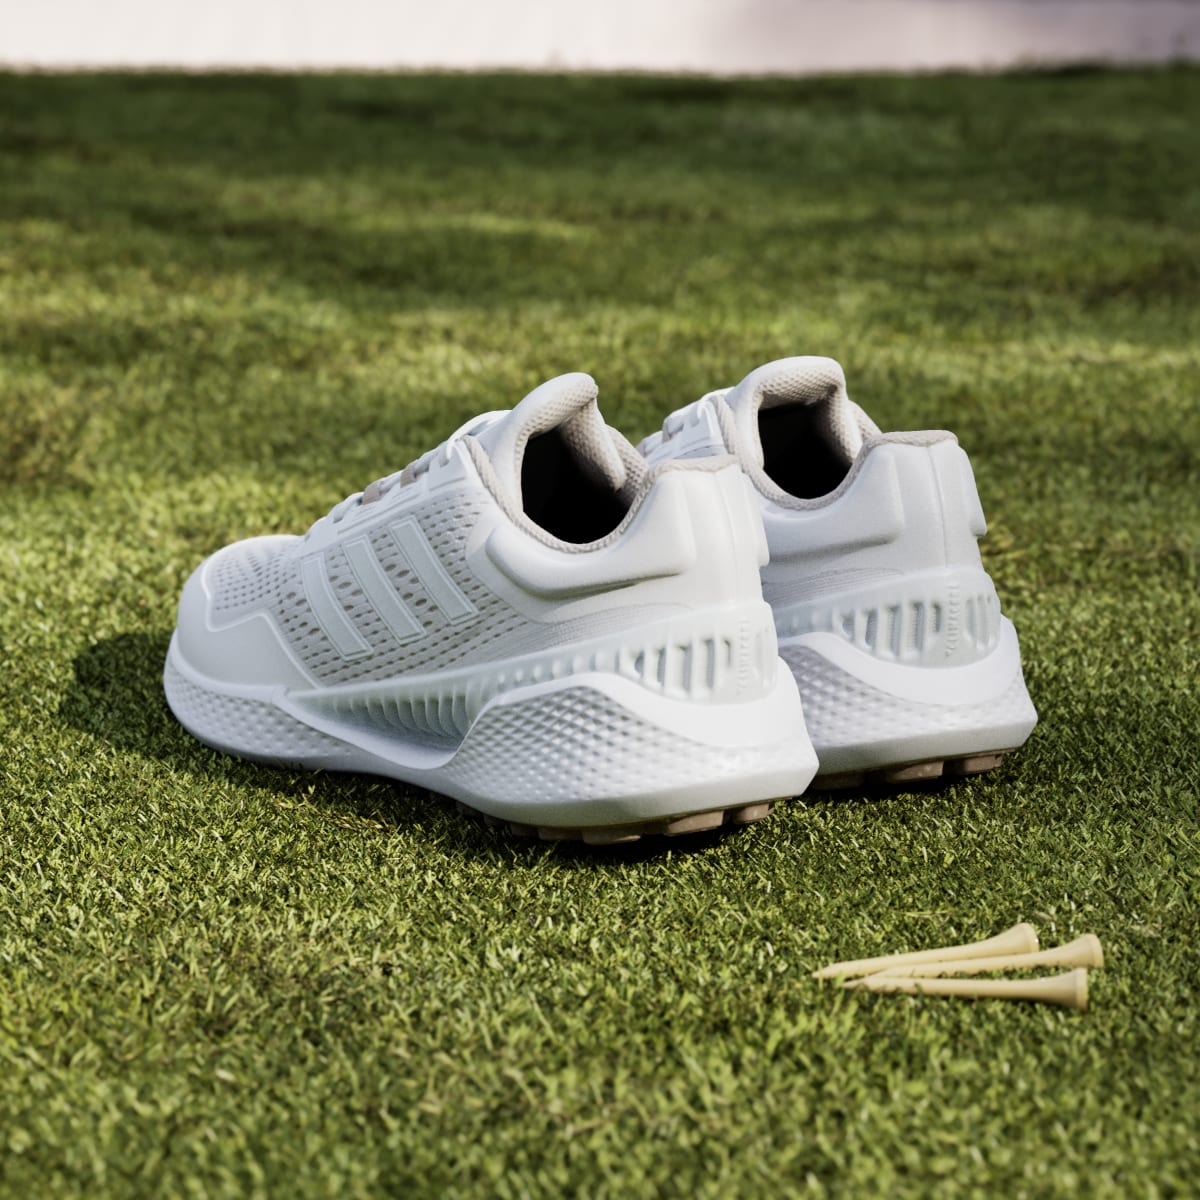 Adidas Summervent 24 Bounce Golf Shoes Low. 5